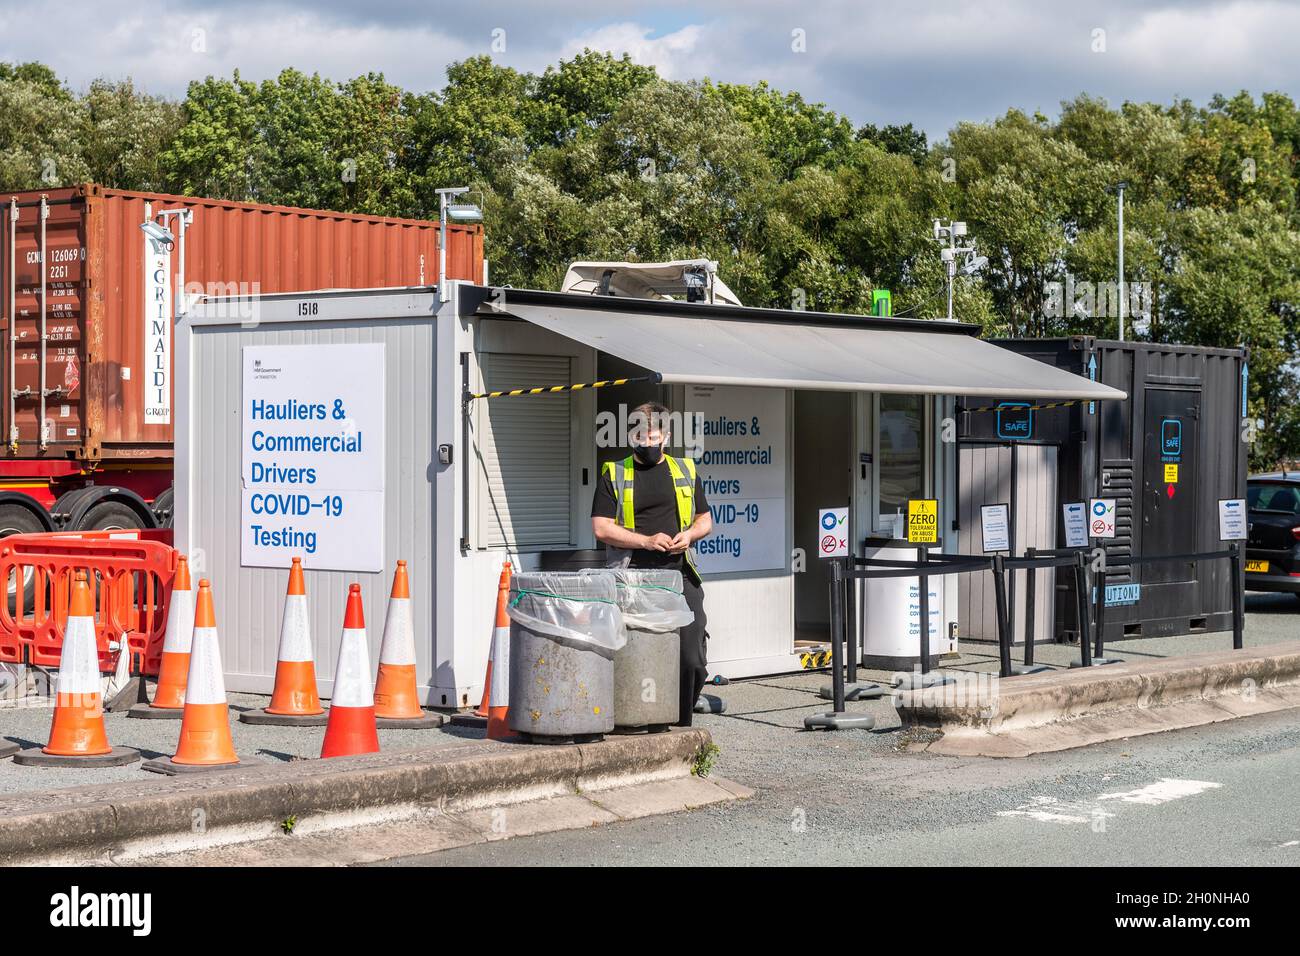 COVID-19 testing centre for commercial drivers at Burtonwood service station on the M62 motorway in the UK. Stock Photo